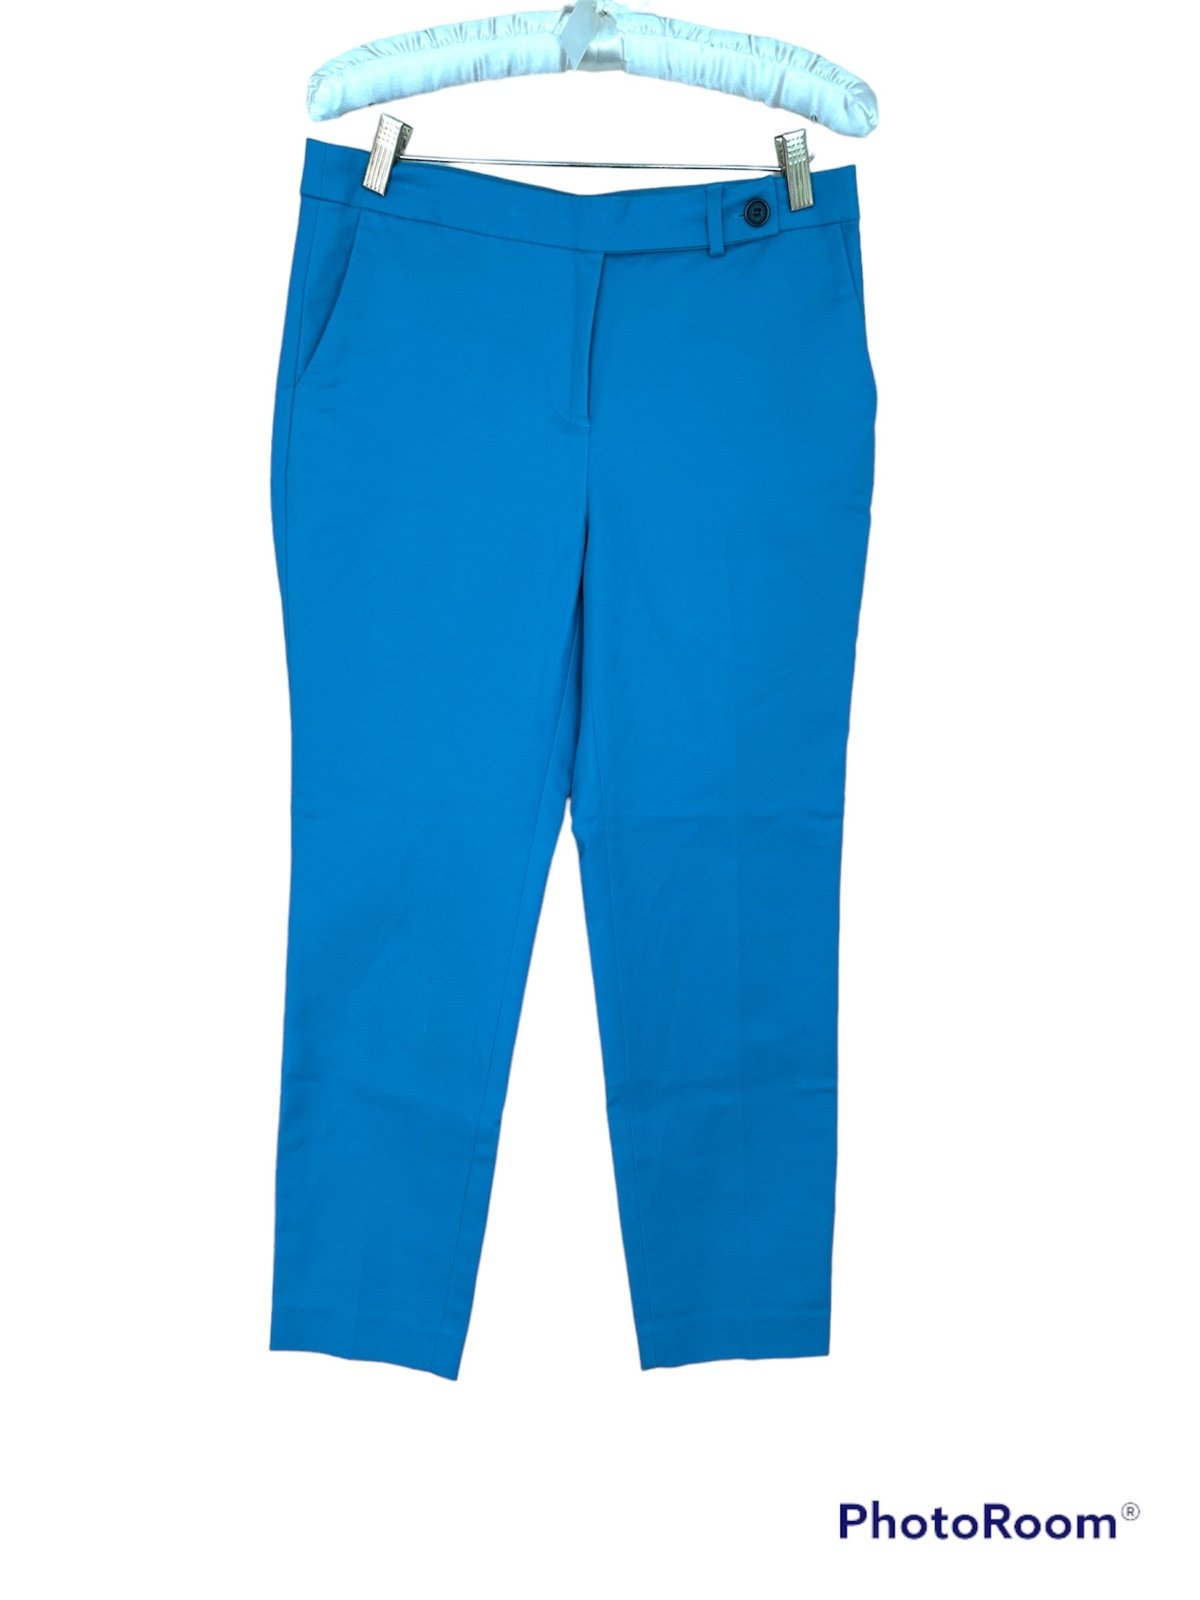 Wholesale price Pure Brand/Blue Pants/Size 4 MBX6Ac50g Great